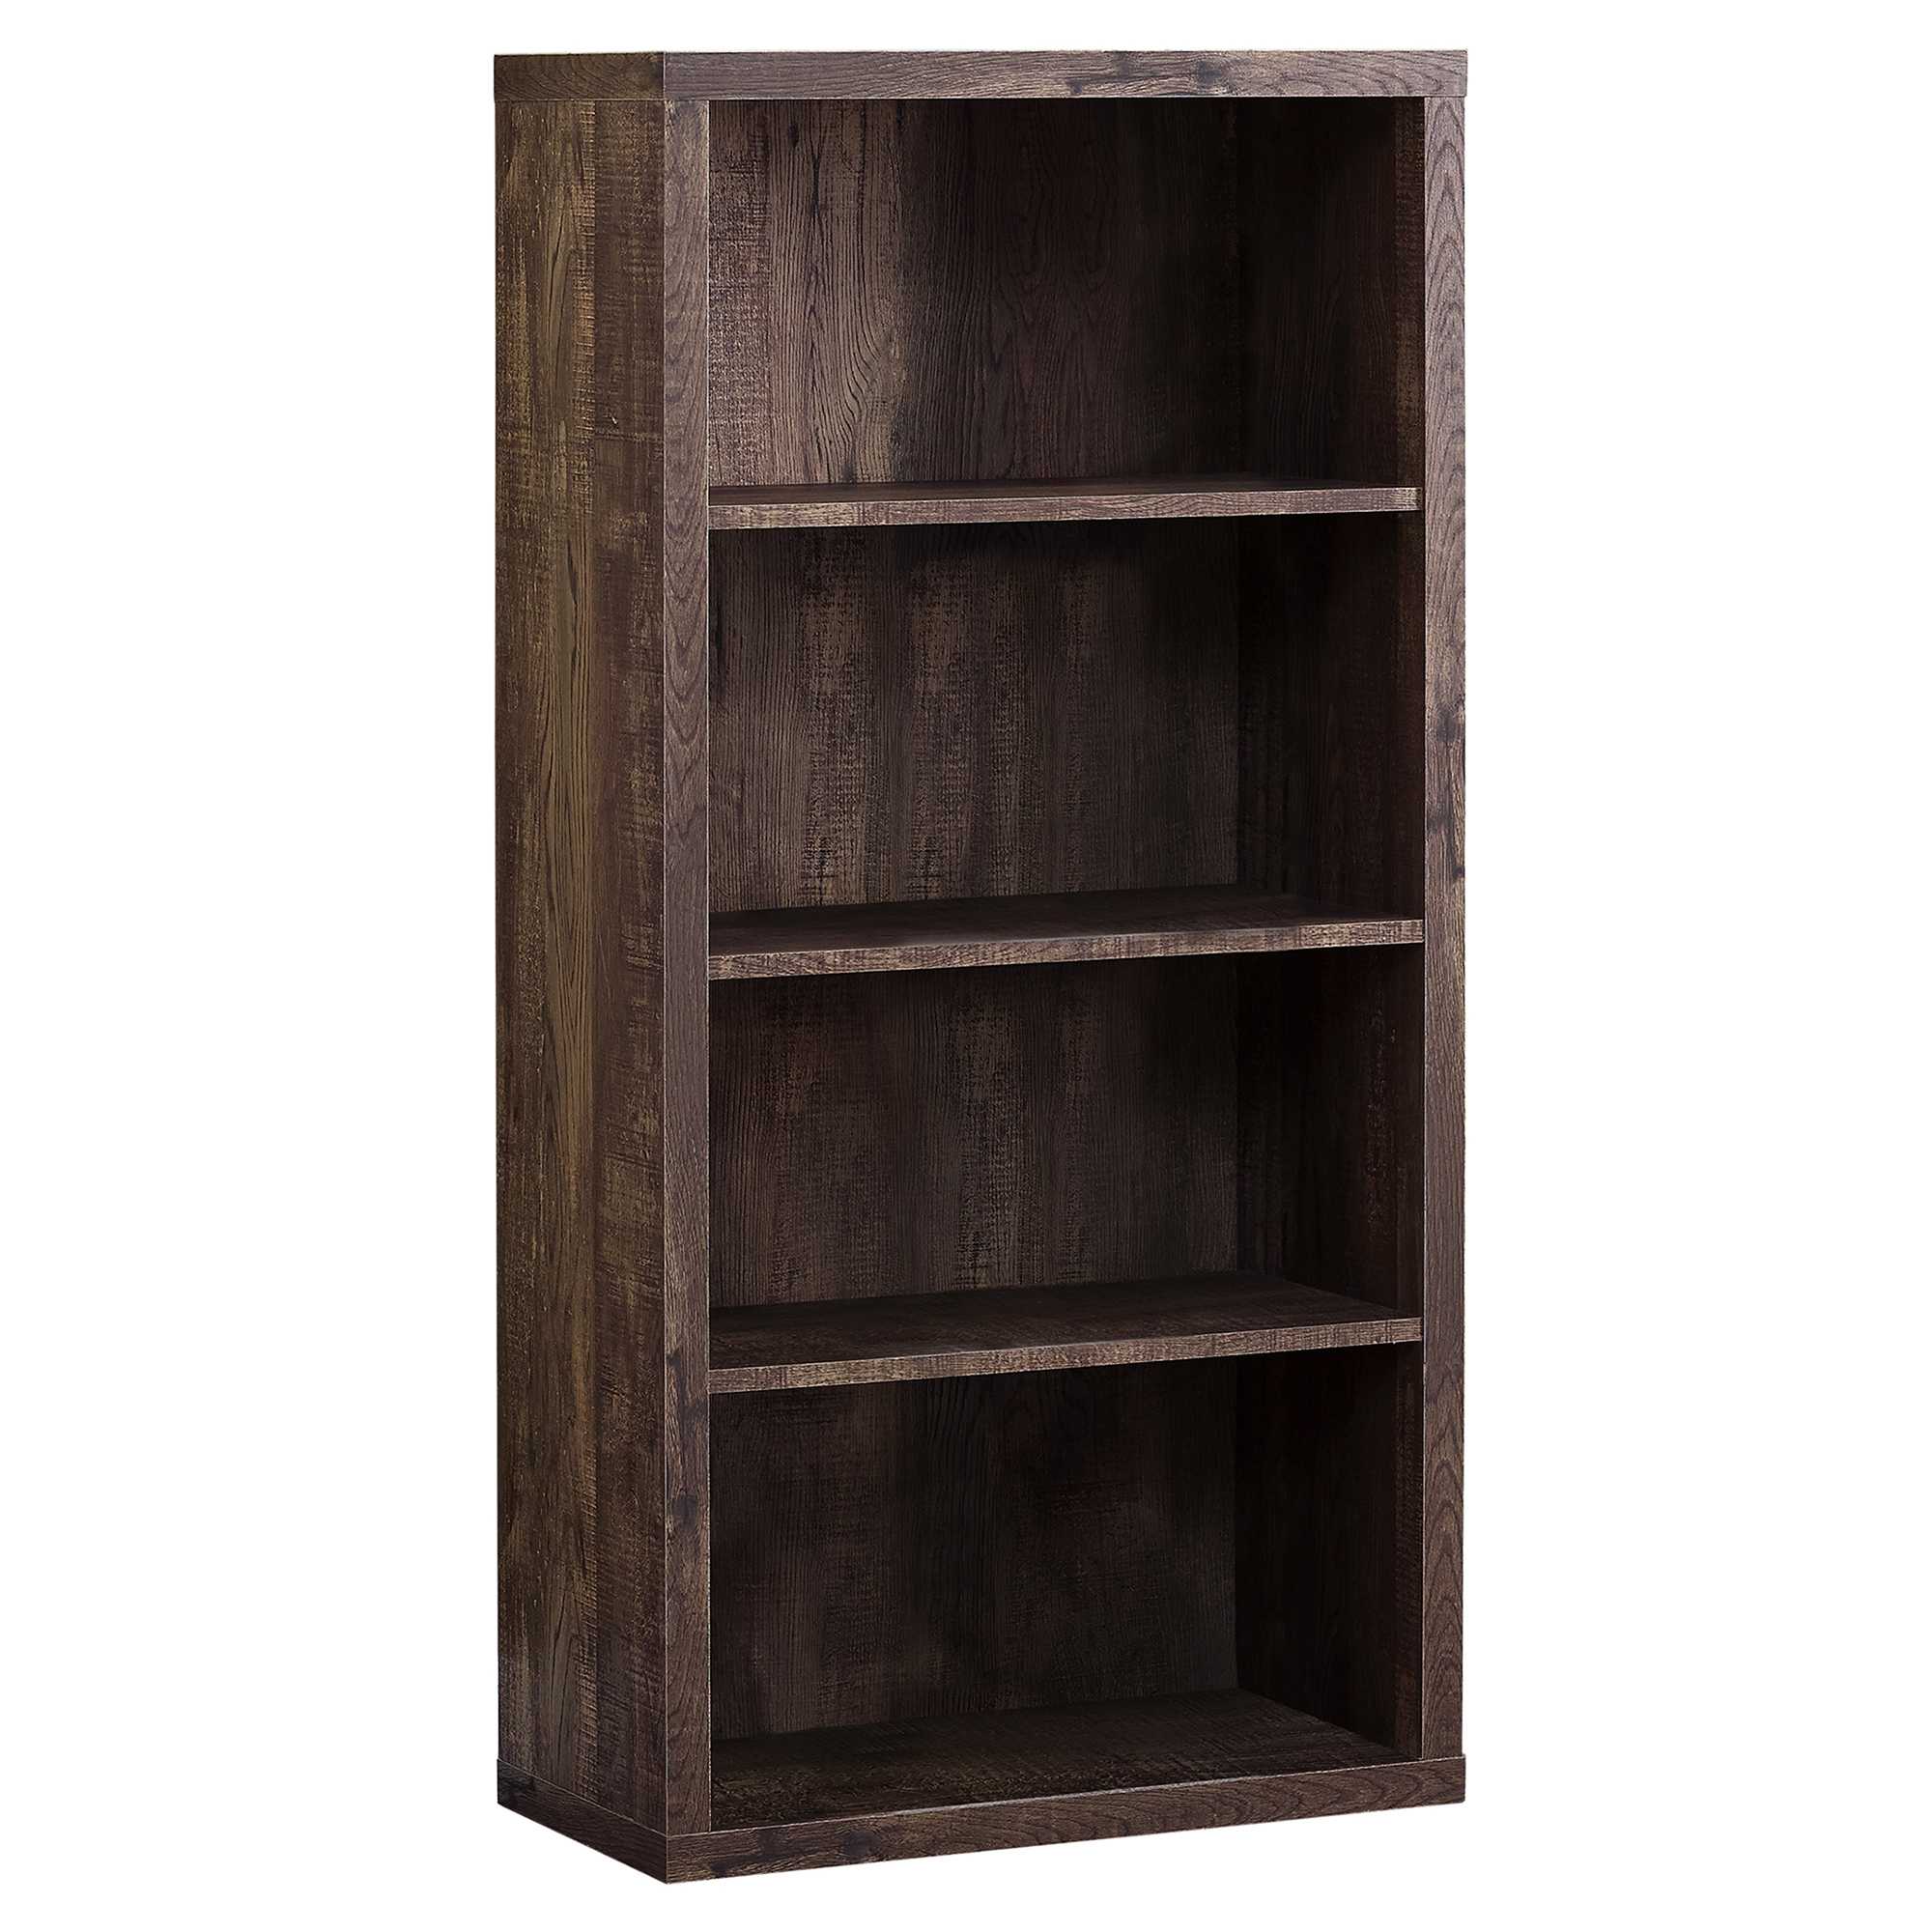 47 5 Brown Particle Board And Mdf Bookshelf With Adjustable